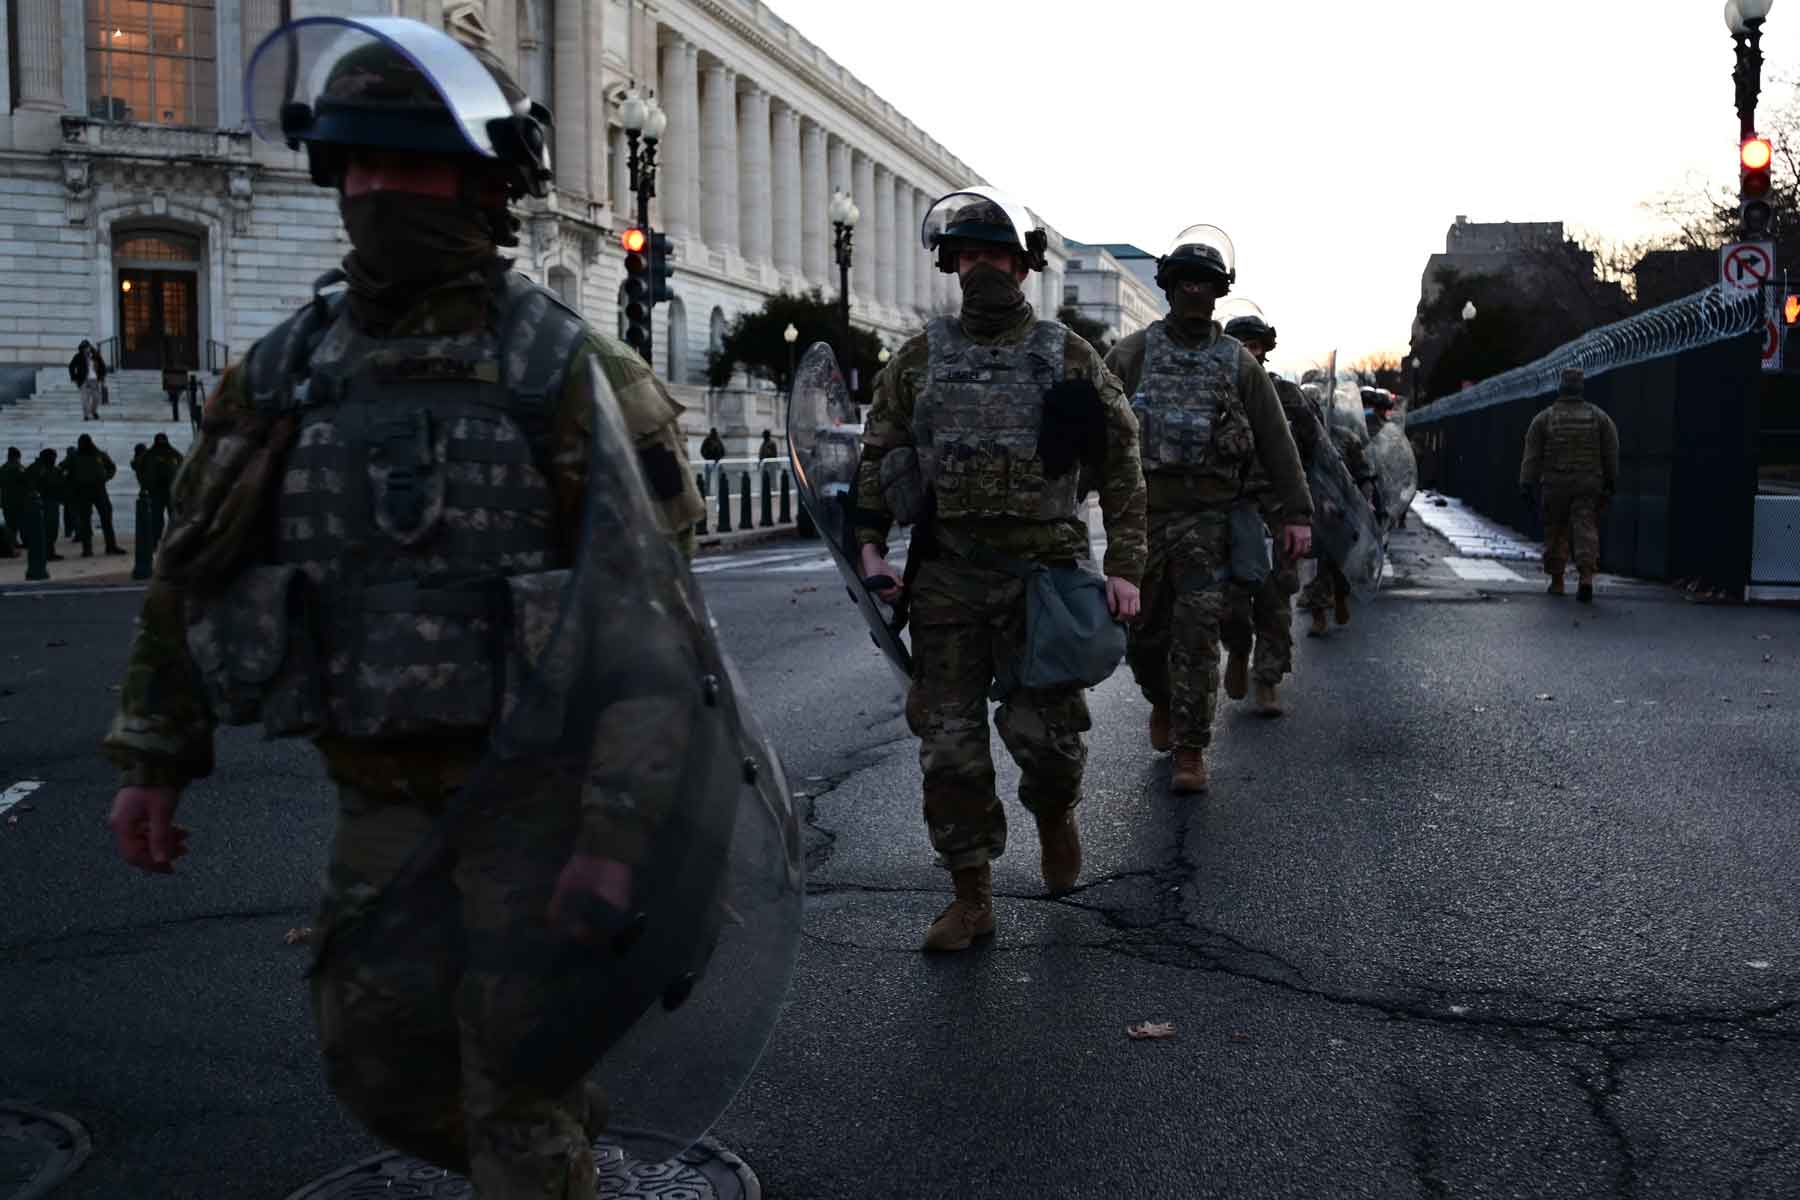 The 26K Guard Troops in DC Did Not Face a Single Inauguration Security Threat: Top General ...